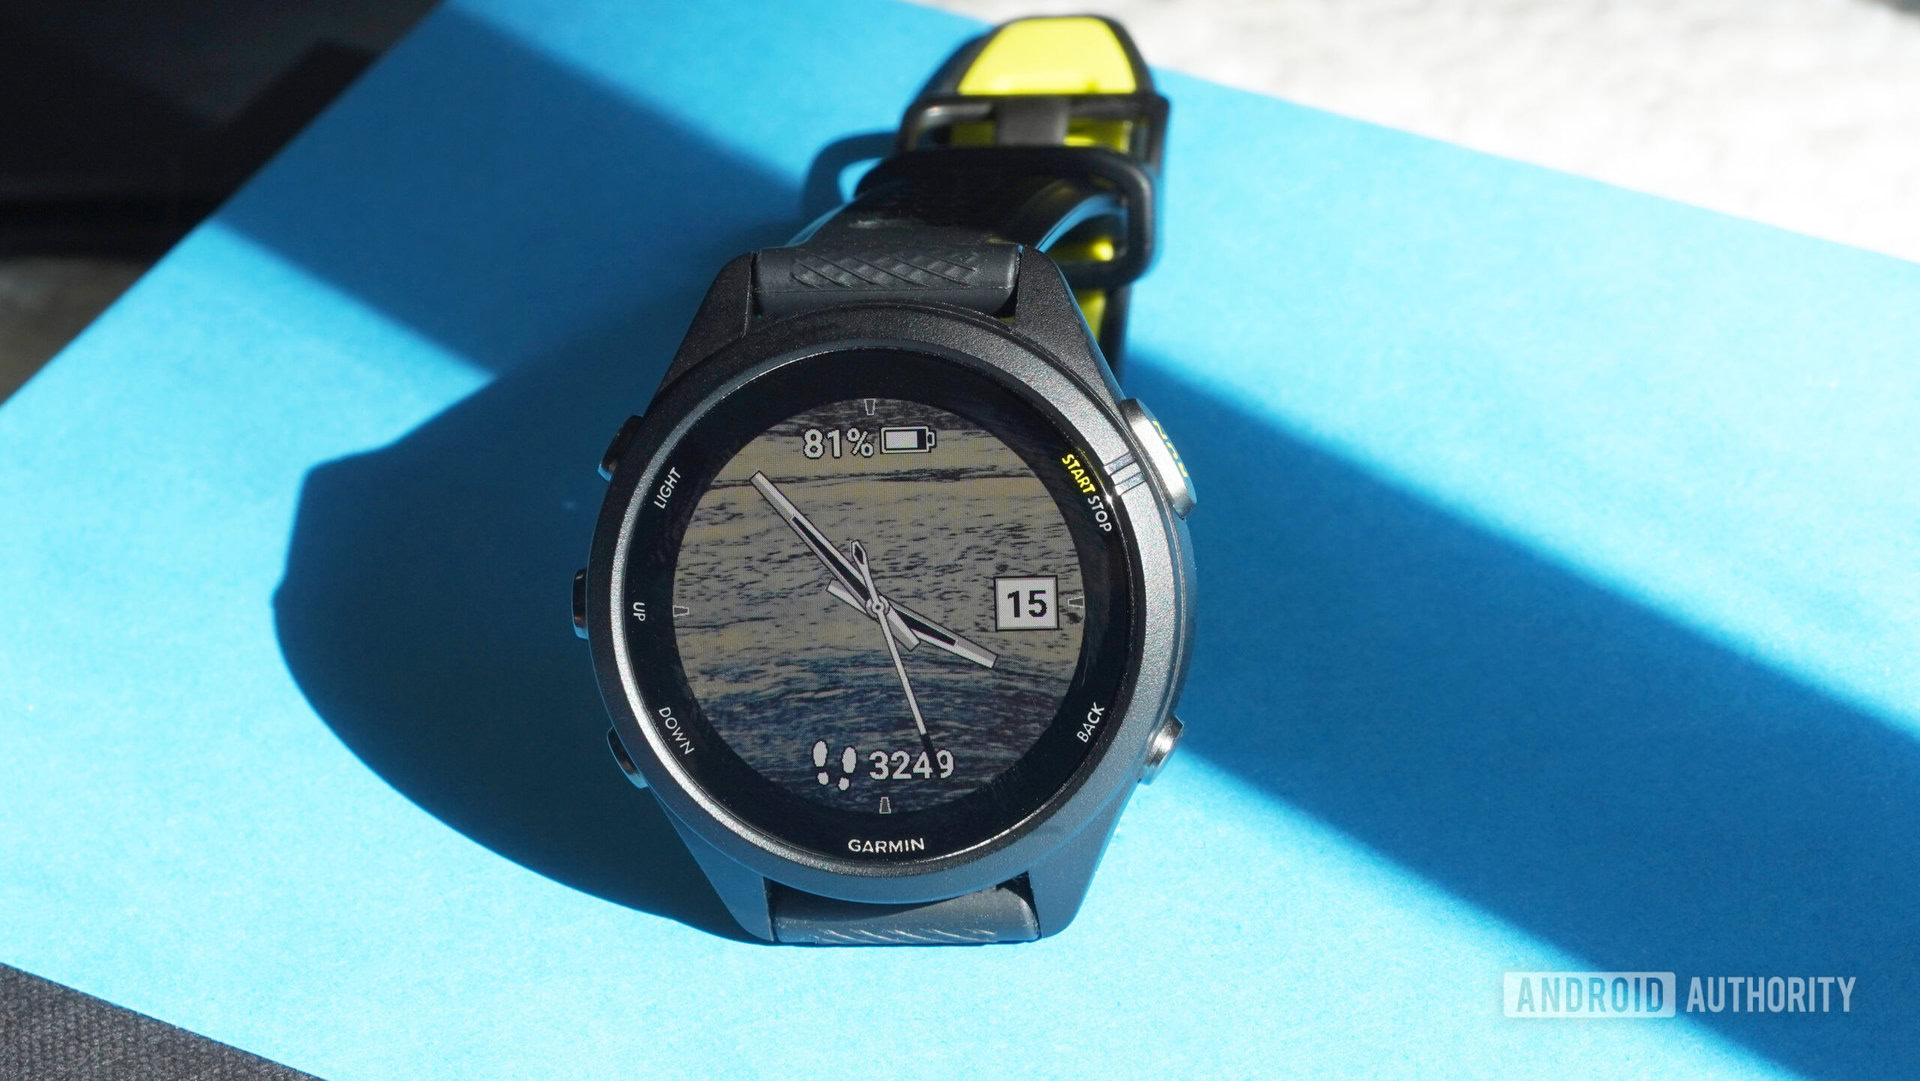 Garmin Forerunner 165 review: Should you buy it? - Android Authority